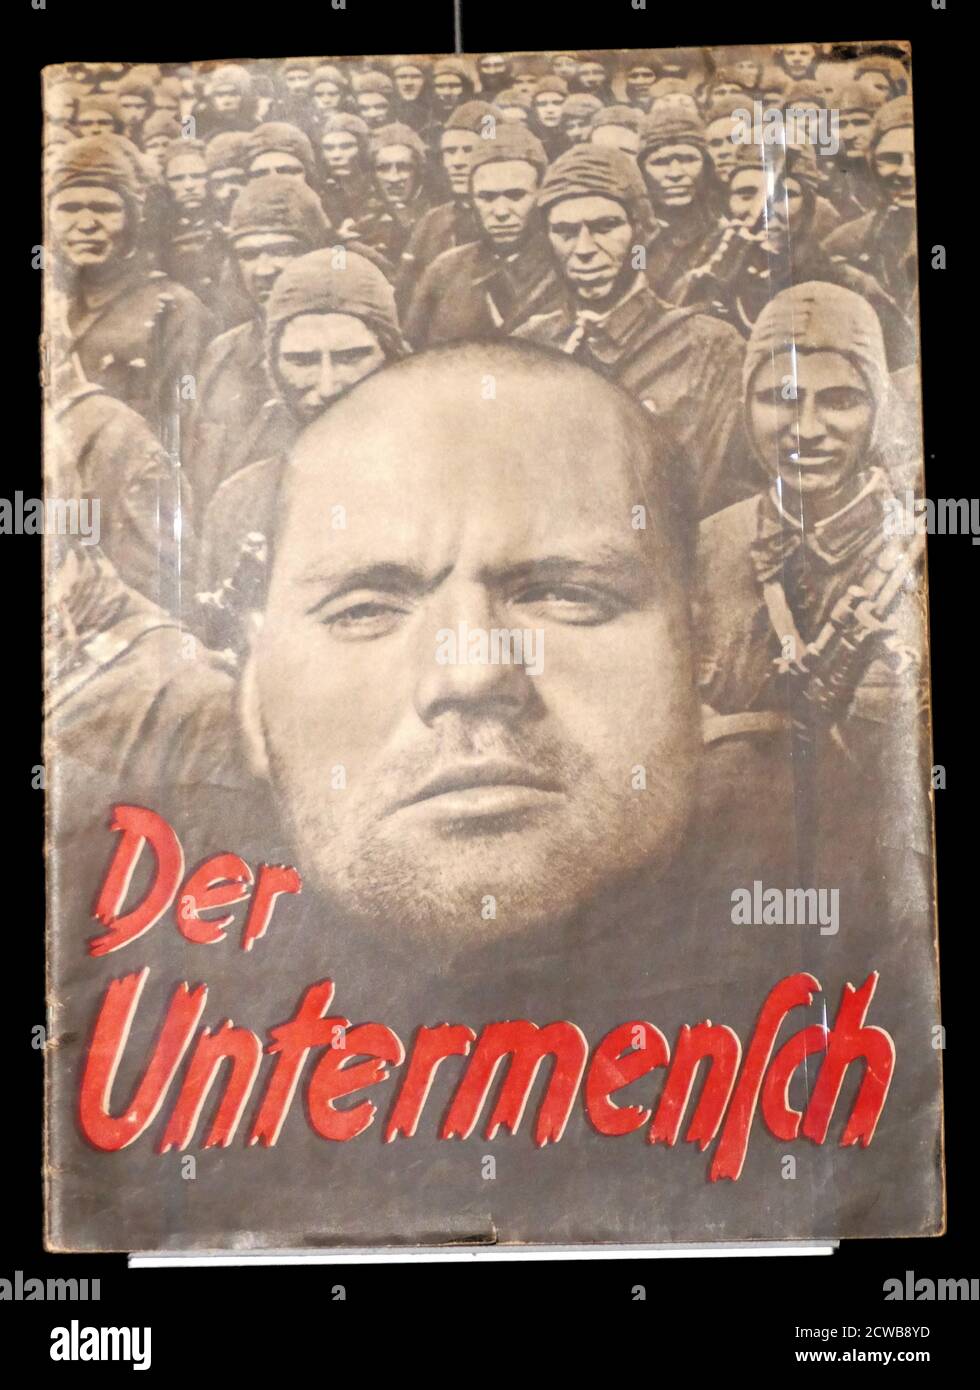 Pamphlet cover showing Untermensch a term that became infamous when the Nazis used it to describe non-Aryan 'inferior people' often referred to as 'the masses from the East', that is Jews, Roma, and Slavs - mainly Poles, Serbs, and later also Russians. Stock Photo